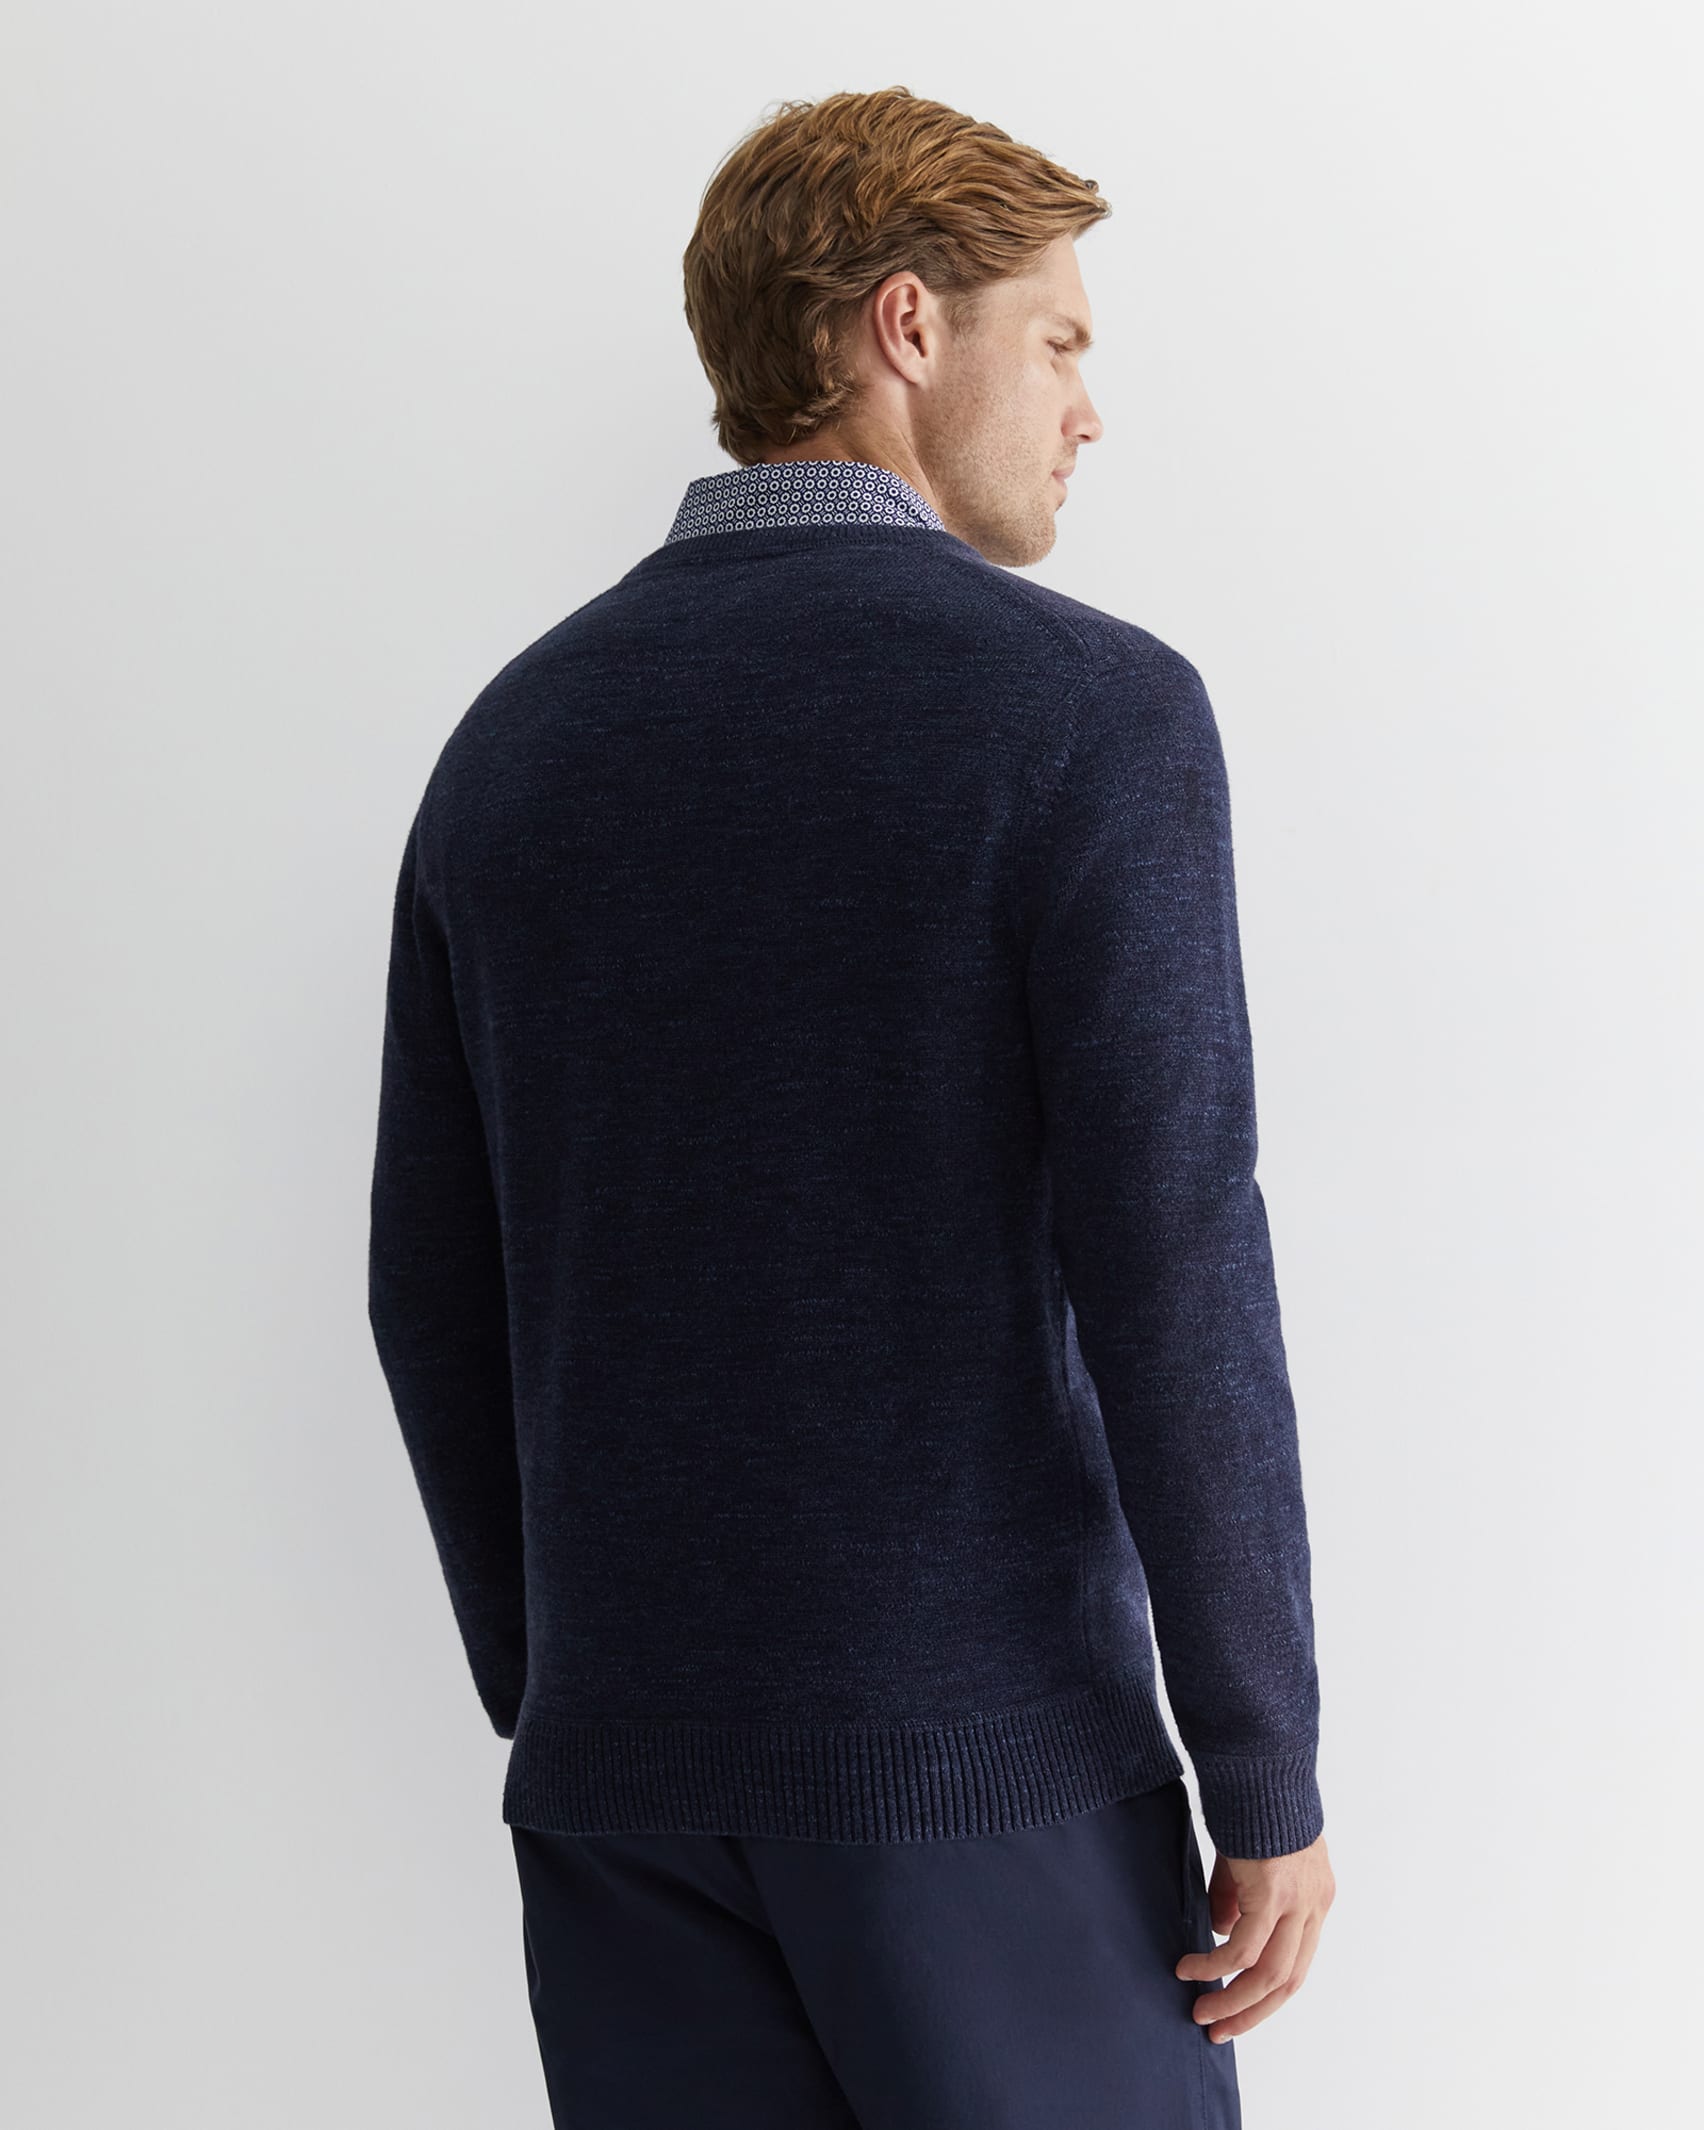 Oliver Crew Neck Knit in NAVY